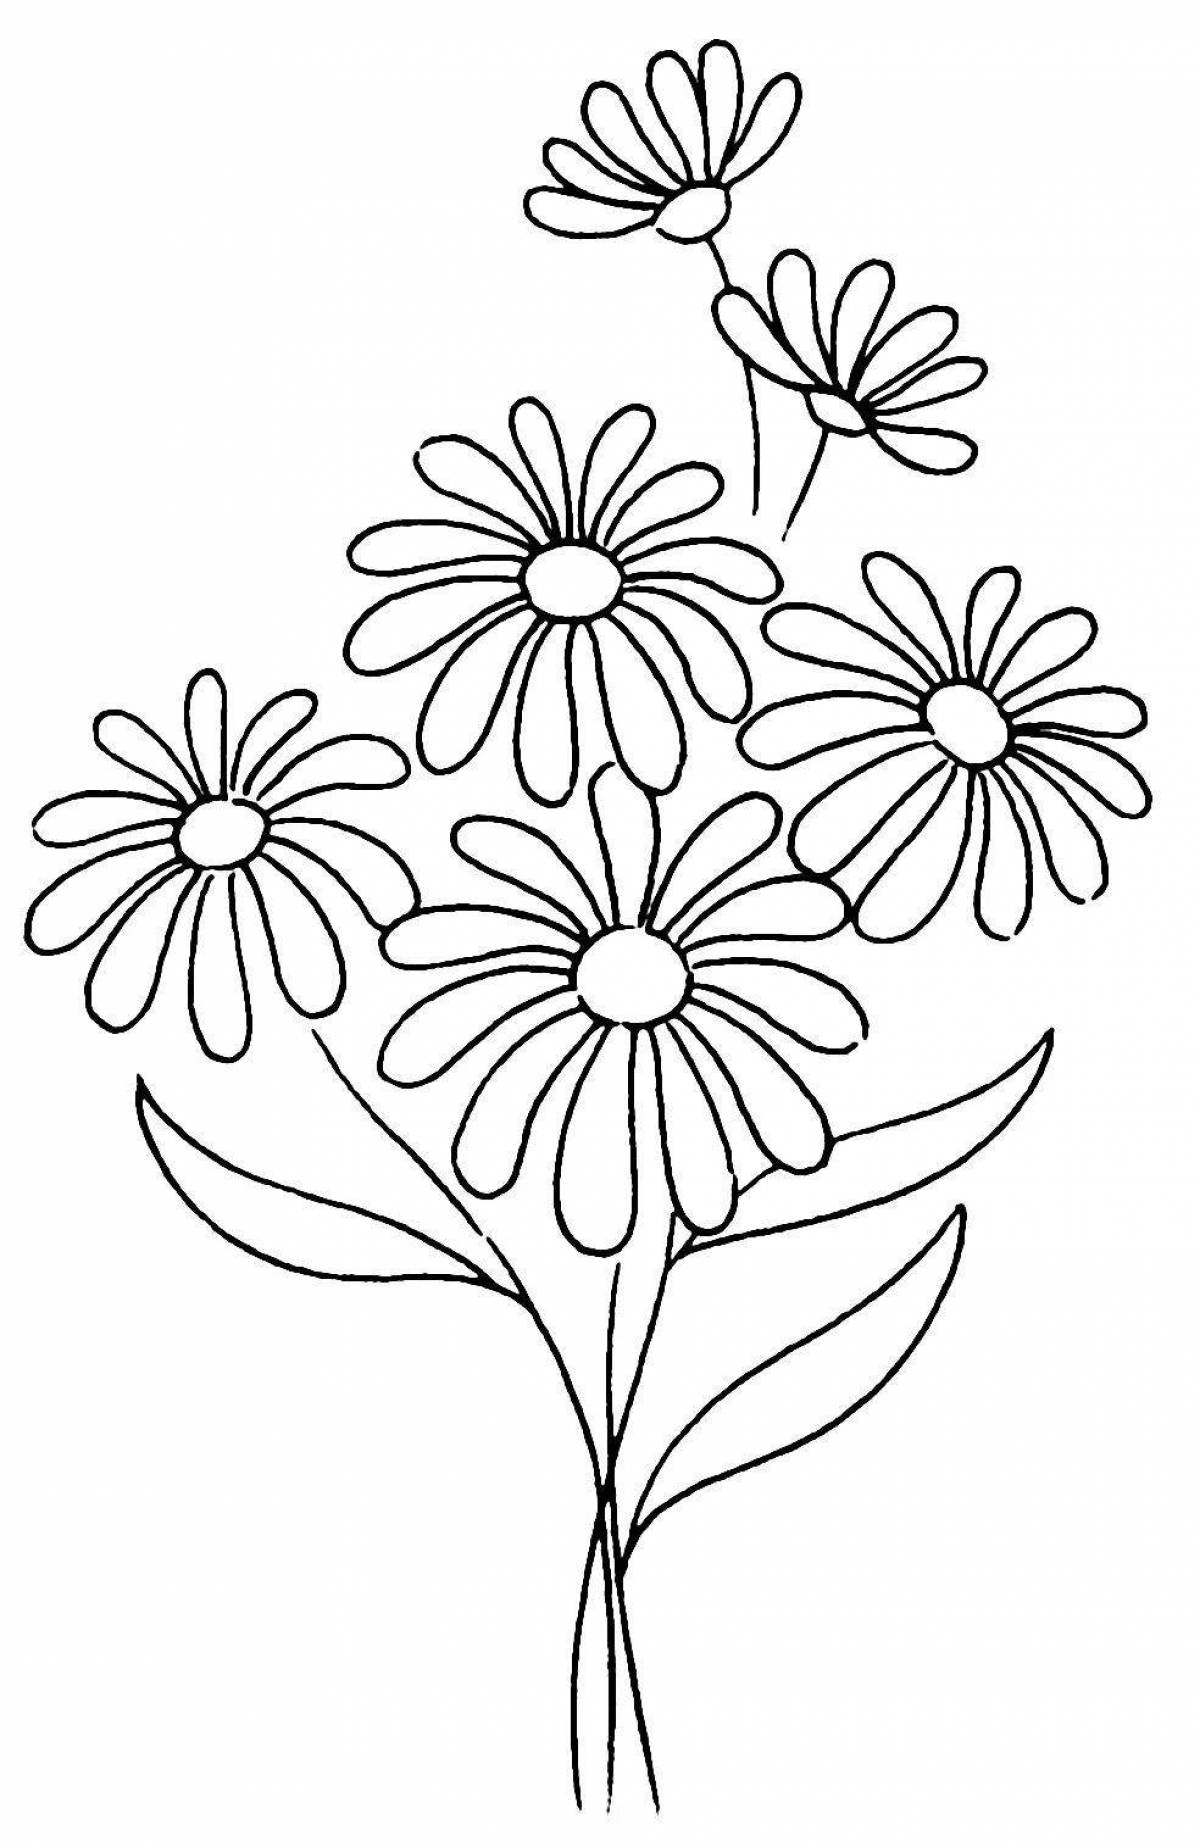 Coloring peaceful daisies